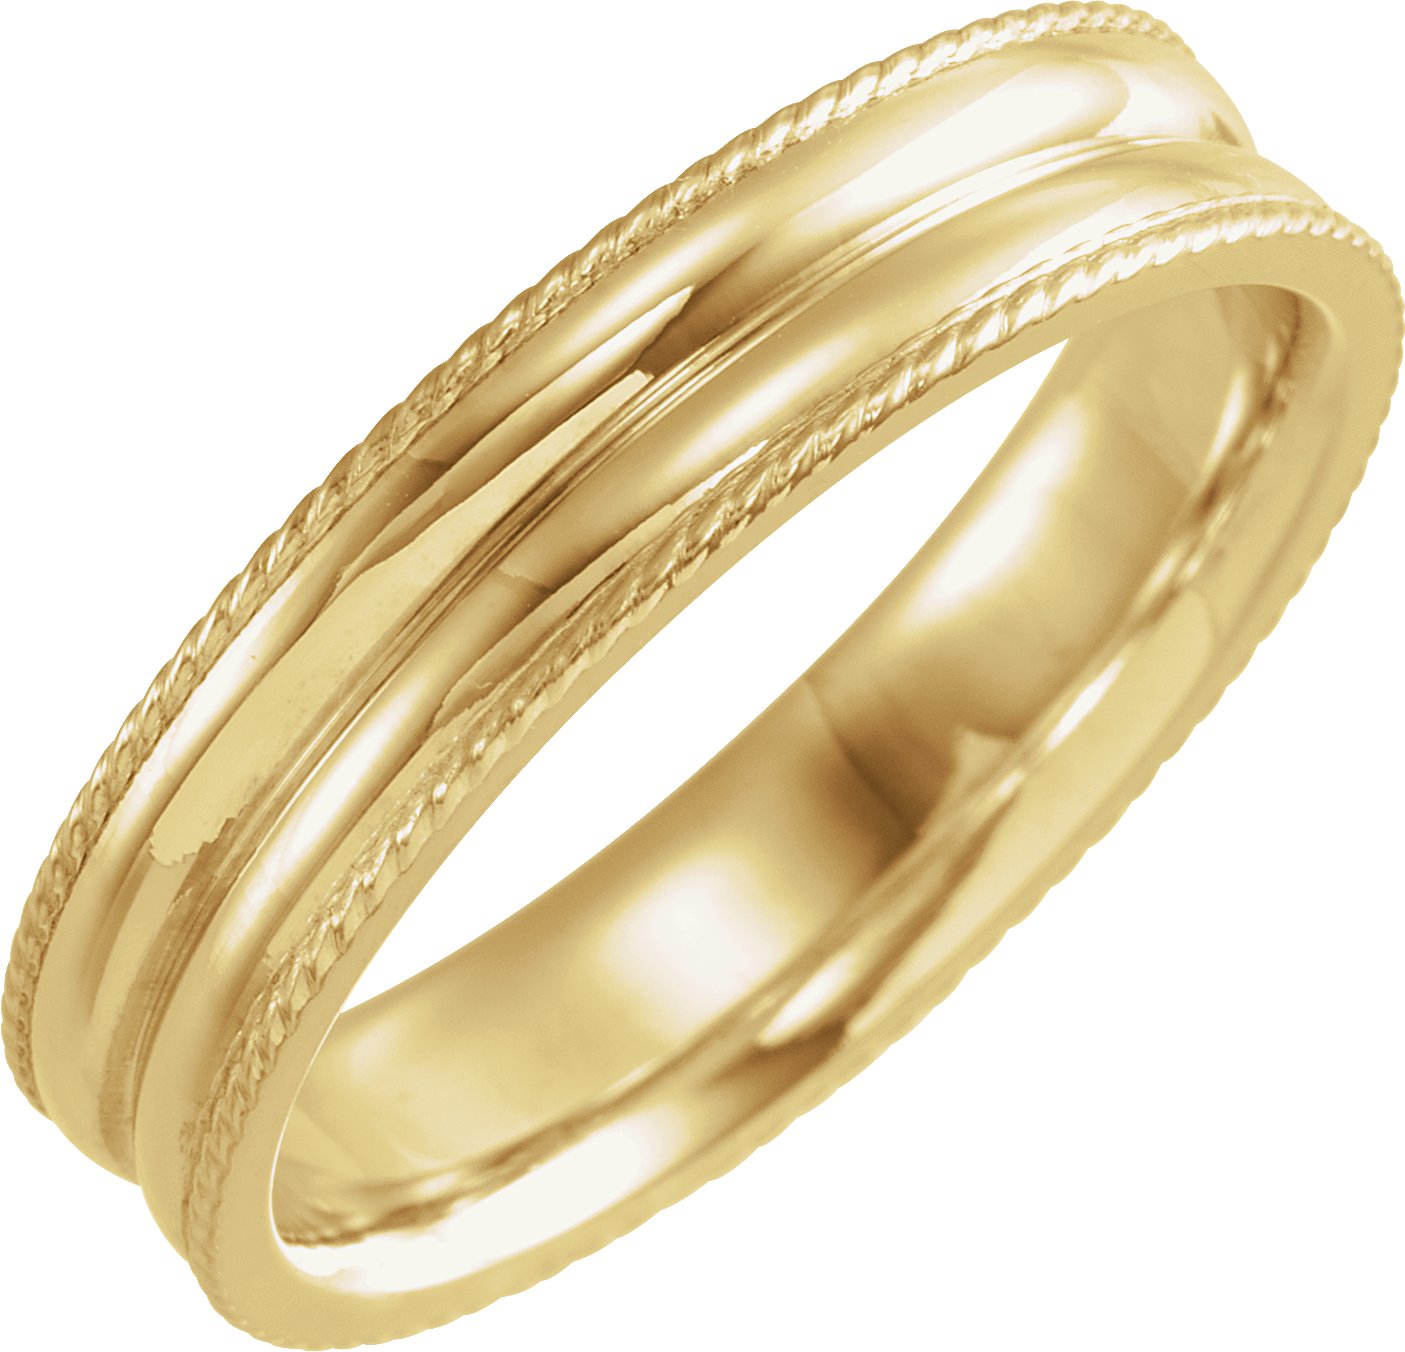 14K Yellow 5 mm Grooved Band with Rope Edge Size 10